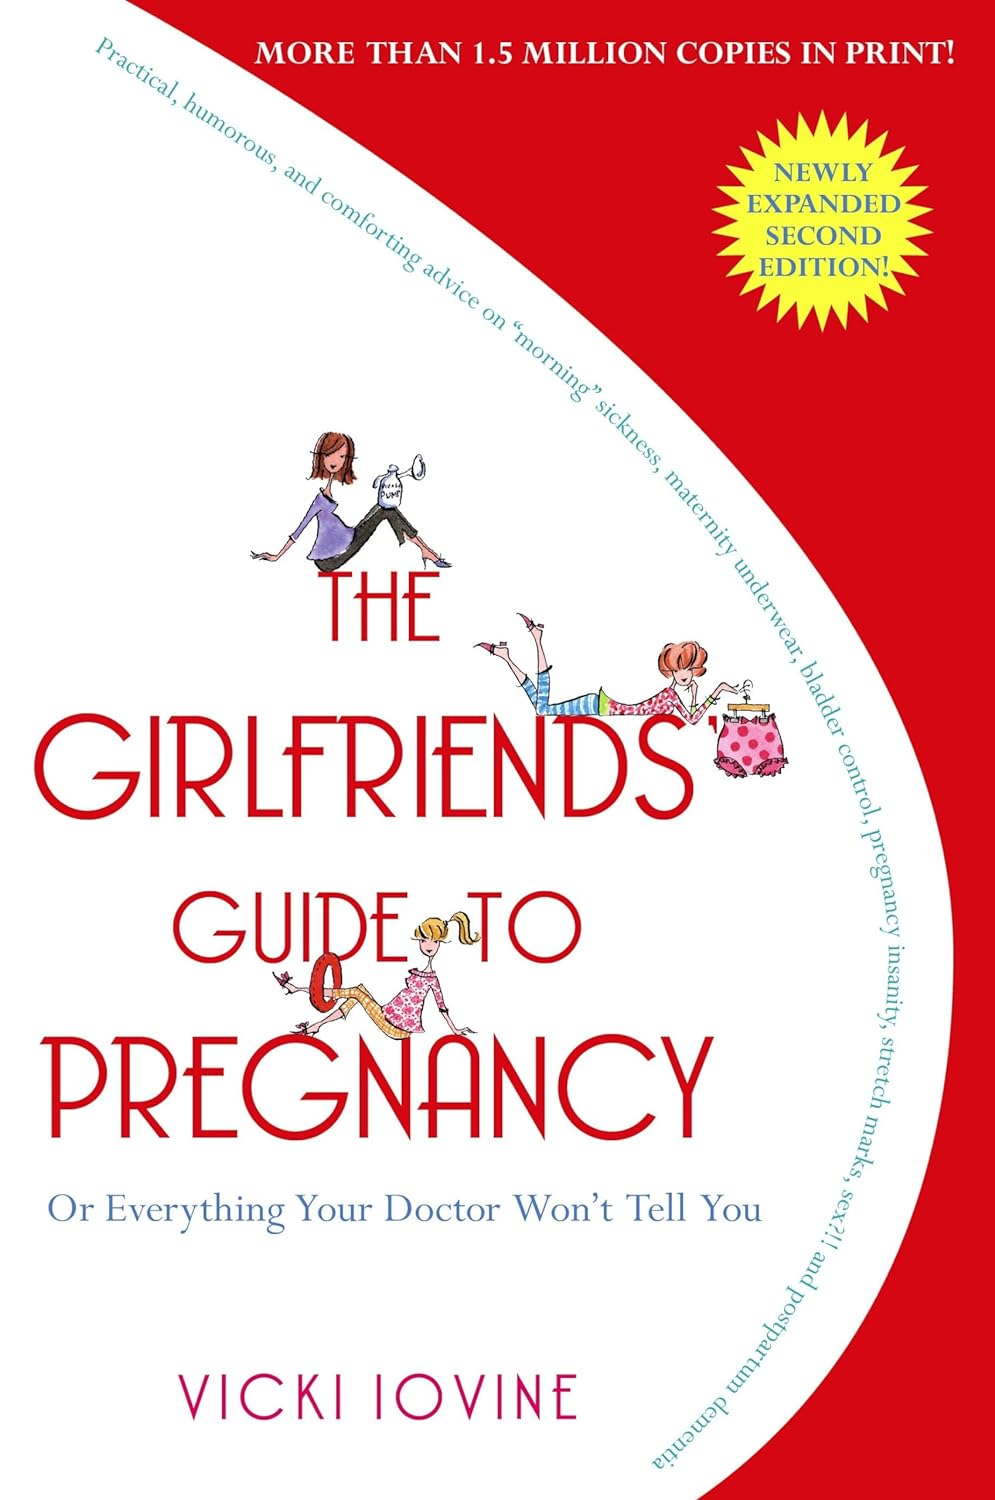 The Girlfriends’ Guide to Pregnancy by Vicki Iovine.